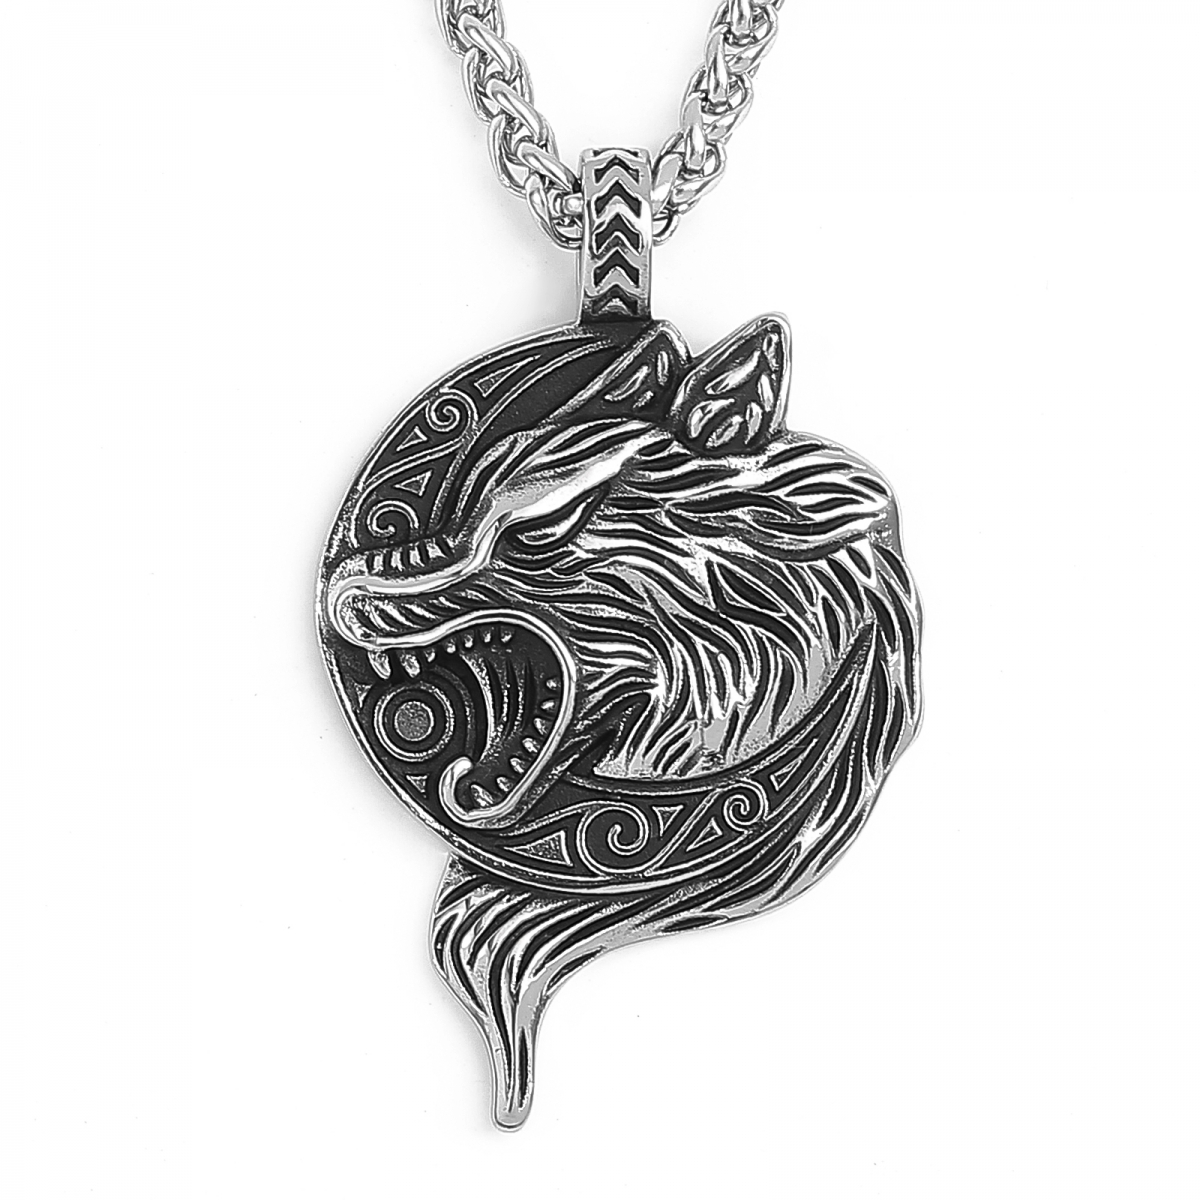 Skoll Wolf Necklace US$2.9/PC-NORSECOLLECTION- Viking Jewelry,Viking Necklace,Viking Bracelet,Viking Rings,Viking Mugs,Viking Accessories,Viking Crafts